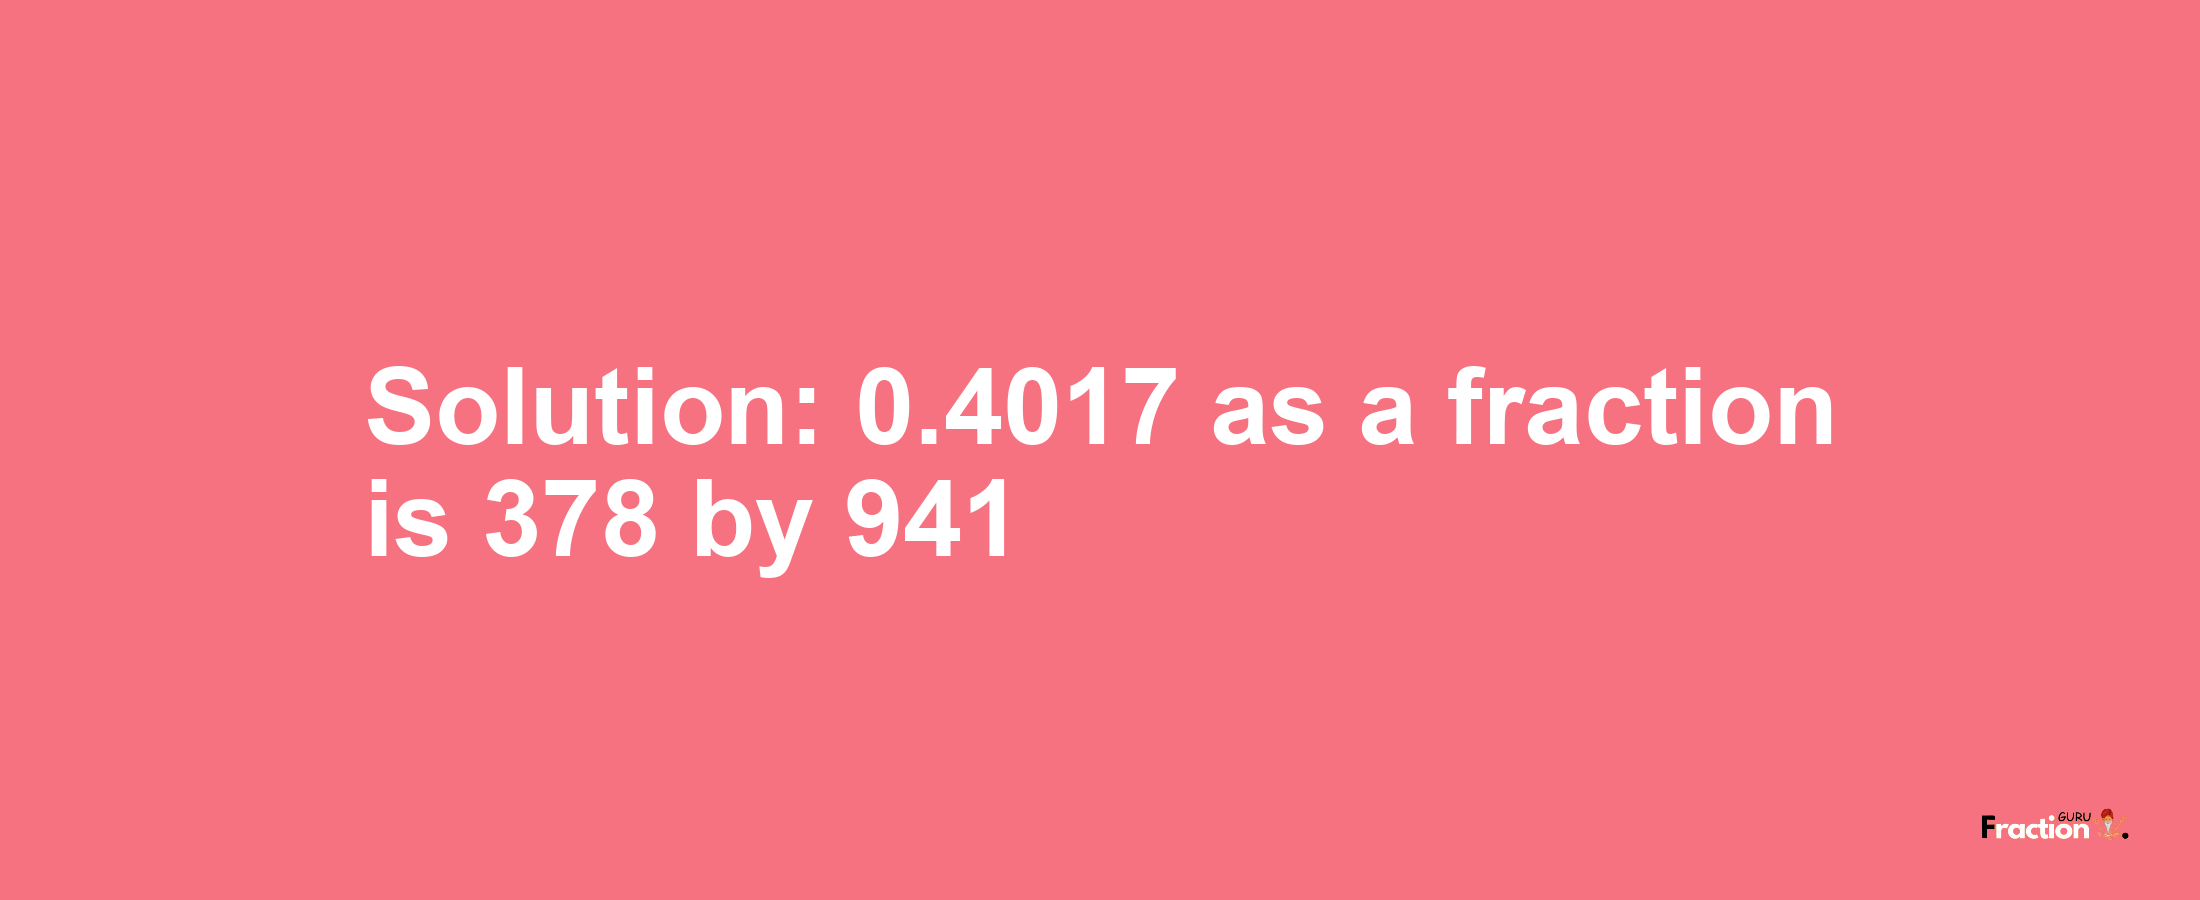 Solution:0.4017 as a fraction is 378/941